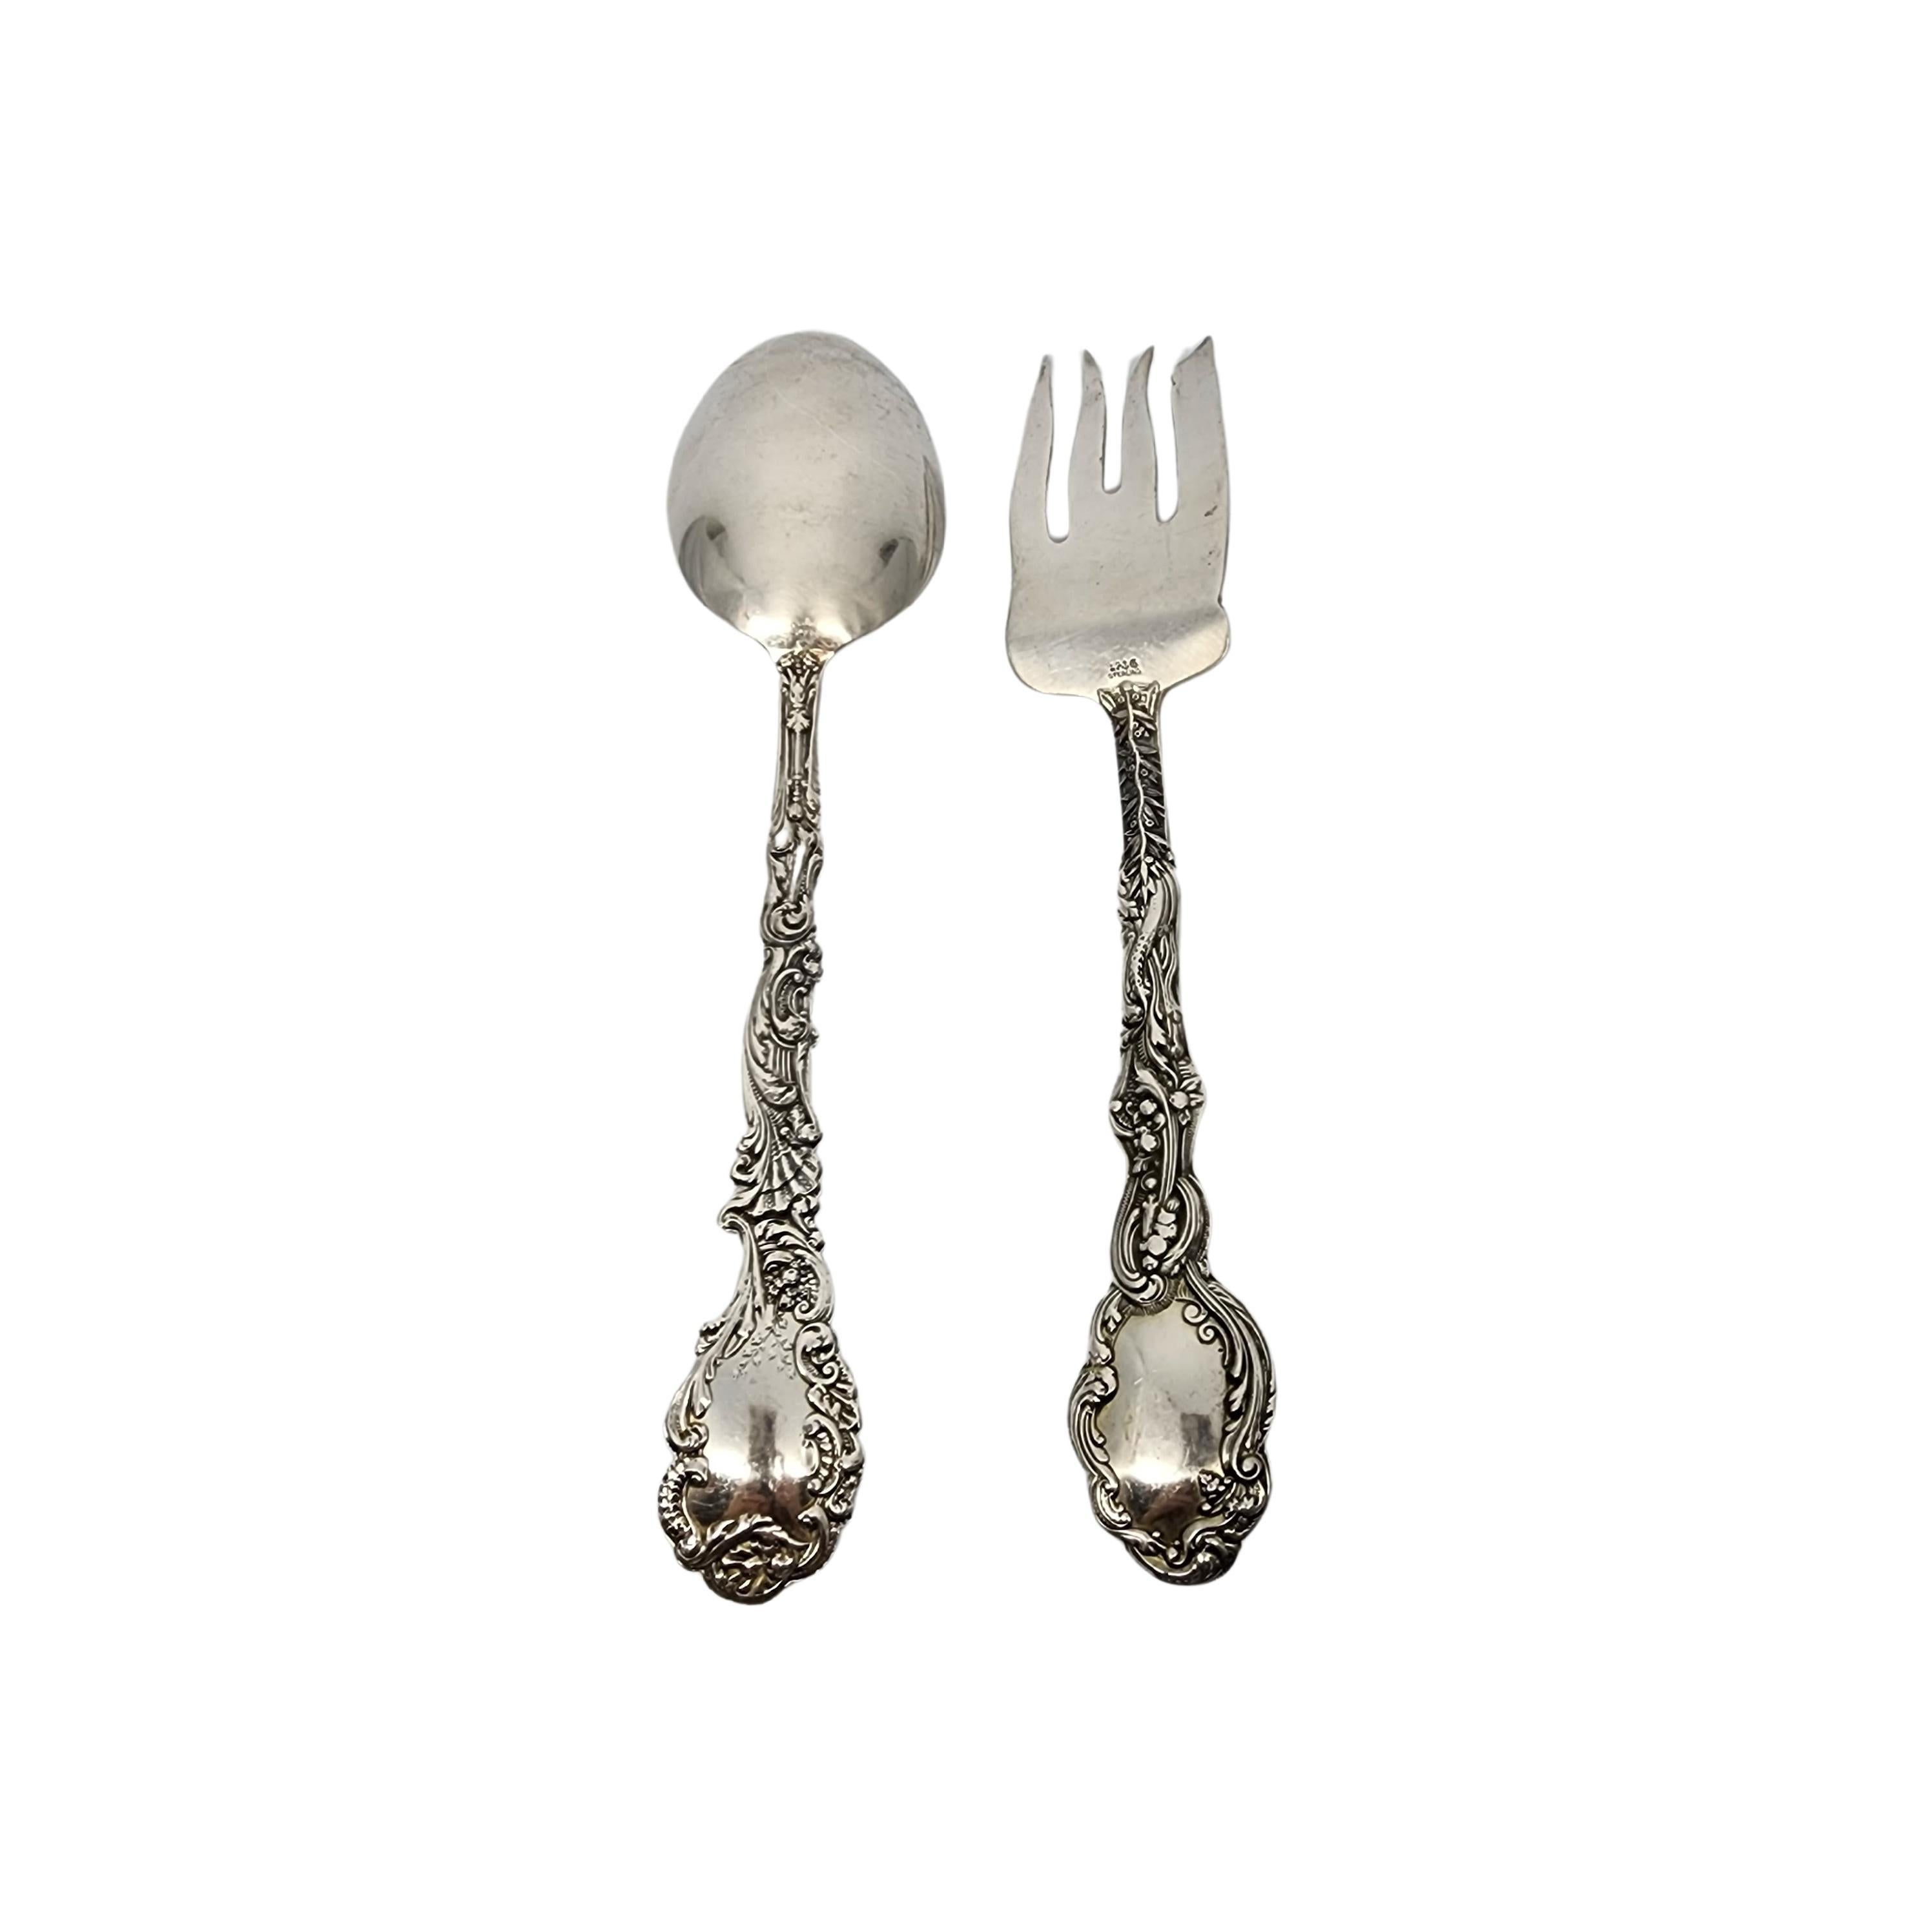 Sterling silver cold meat serving fork and serving tablespoon by Gorham in the Versailles pattern.

No monogram.

Gorham's Versailles is a multi motif pattern designed by Antoine Heller in 1885. Named for the Palace of Versailles, the pattern